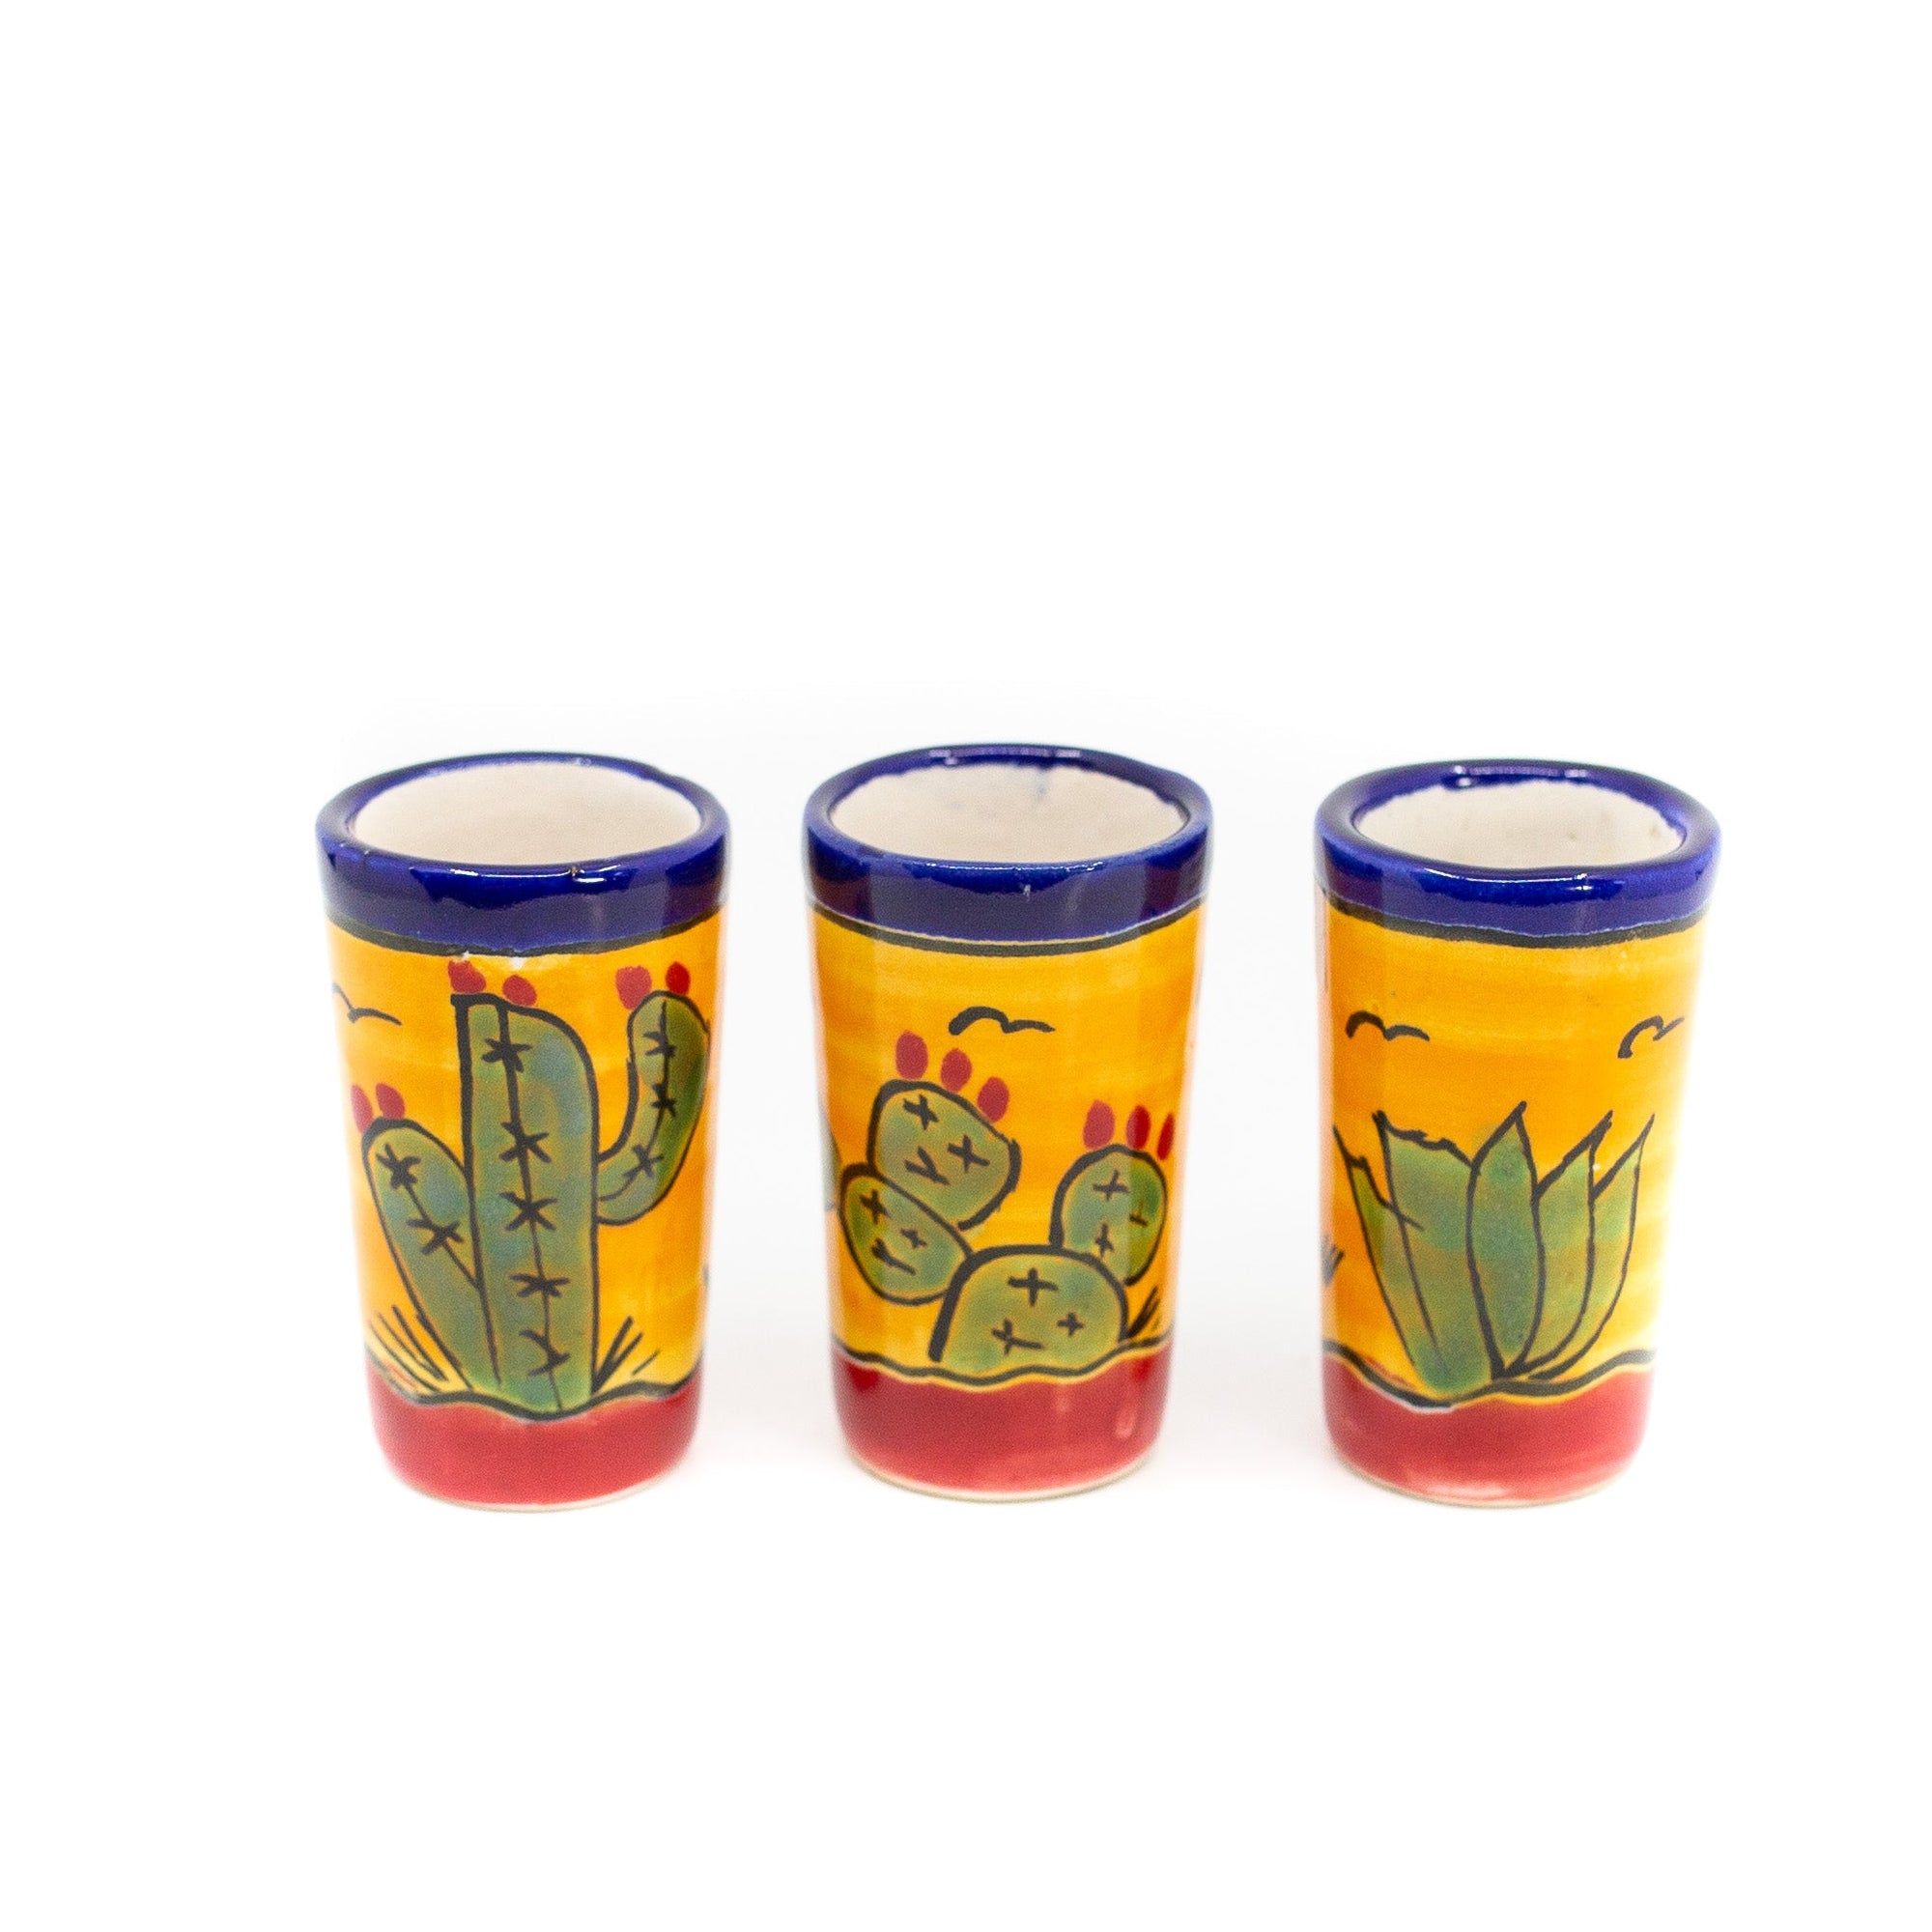 Photo of Small talavera pottery painted tequila glass